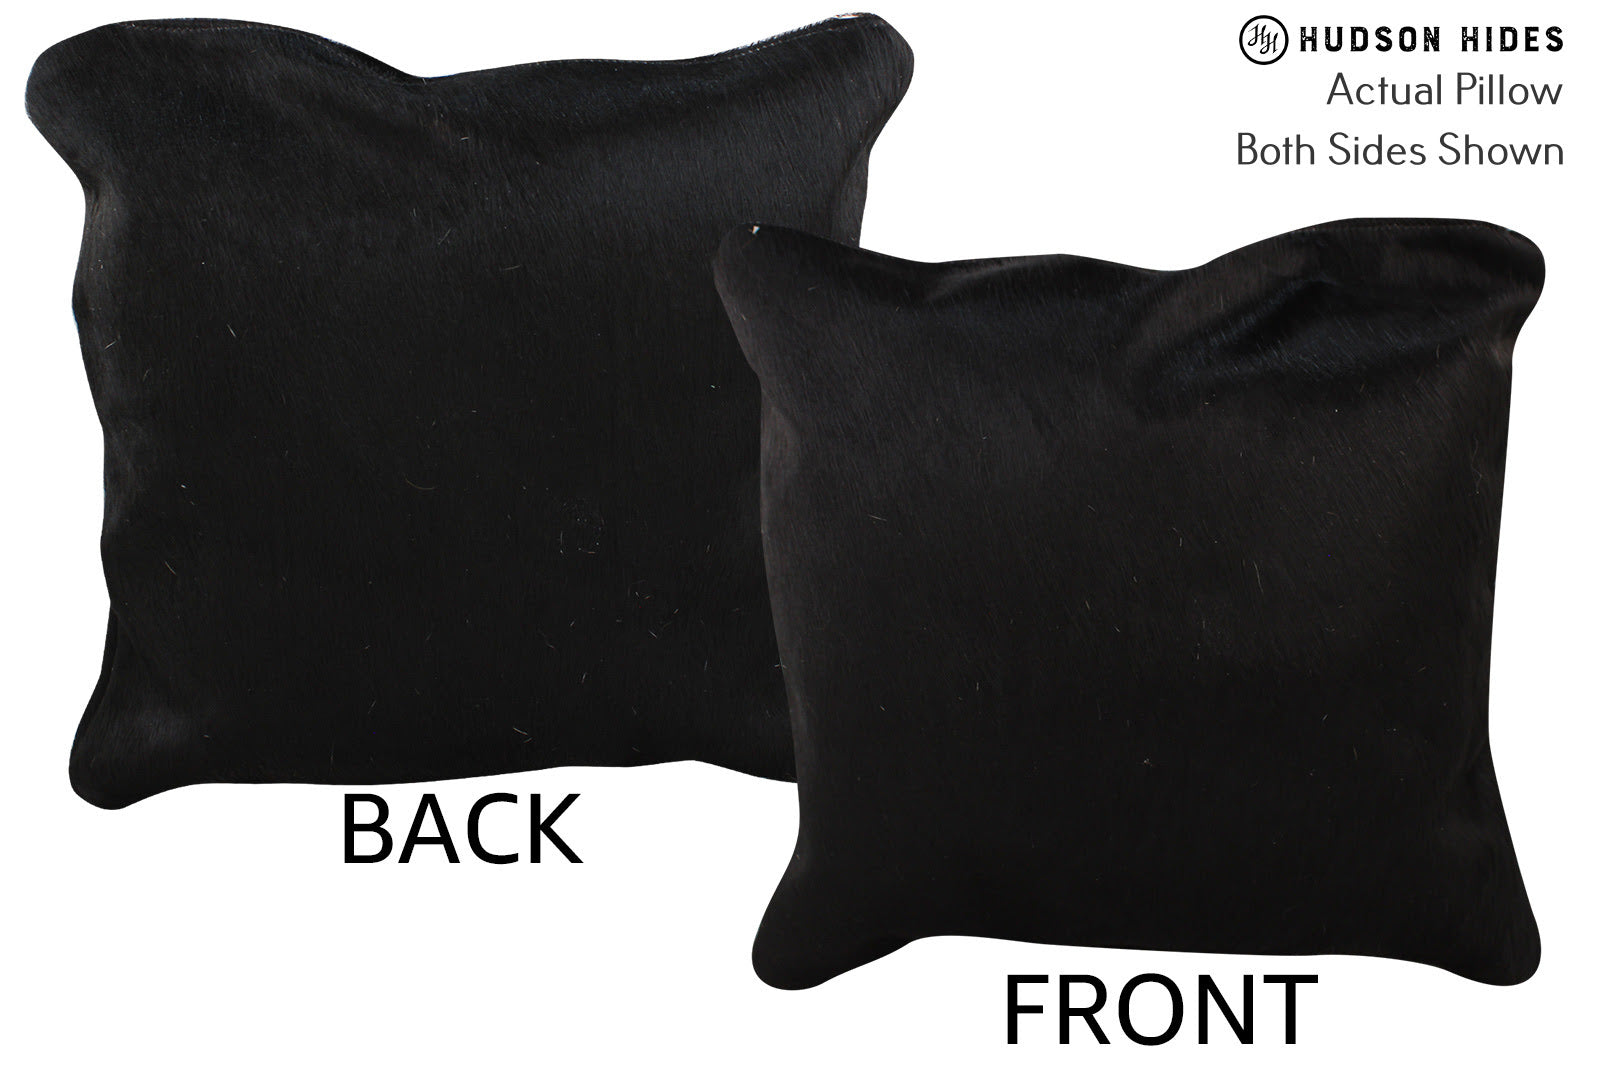 Solid Black Cowhide Pillow #74103